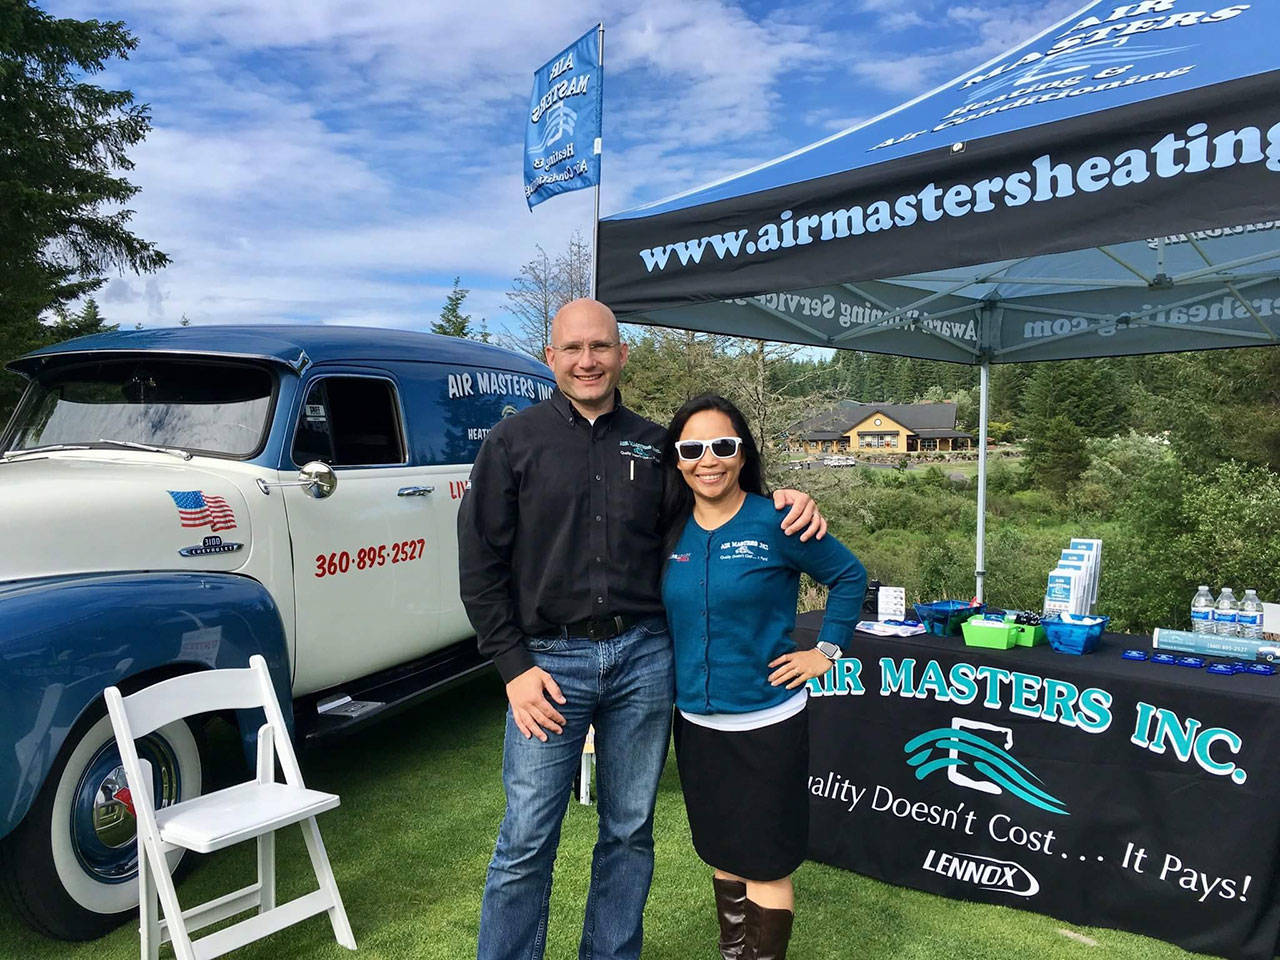 Mark and Rosemarie Timmerman are the force behind Air Masters heating and cooling company that works throughout Kitsap County. Contributed photo